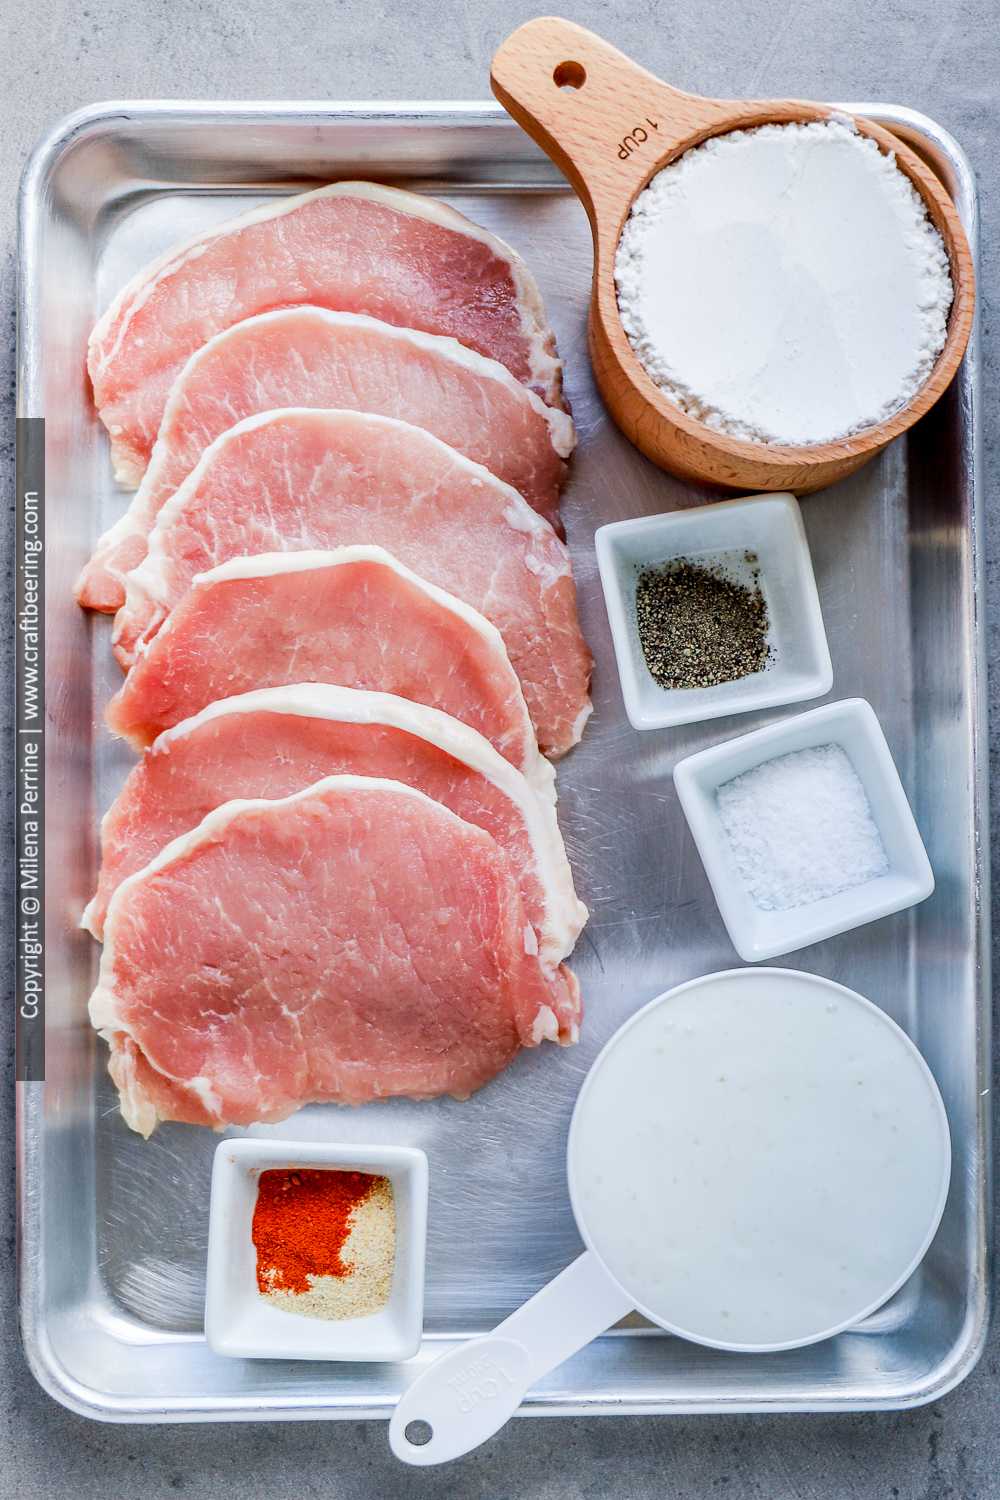 Boneless pork loin chops and other ingredients for Southern fried pork chops.